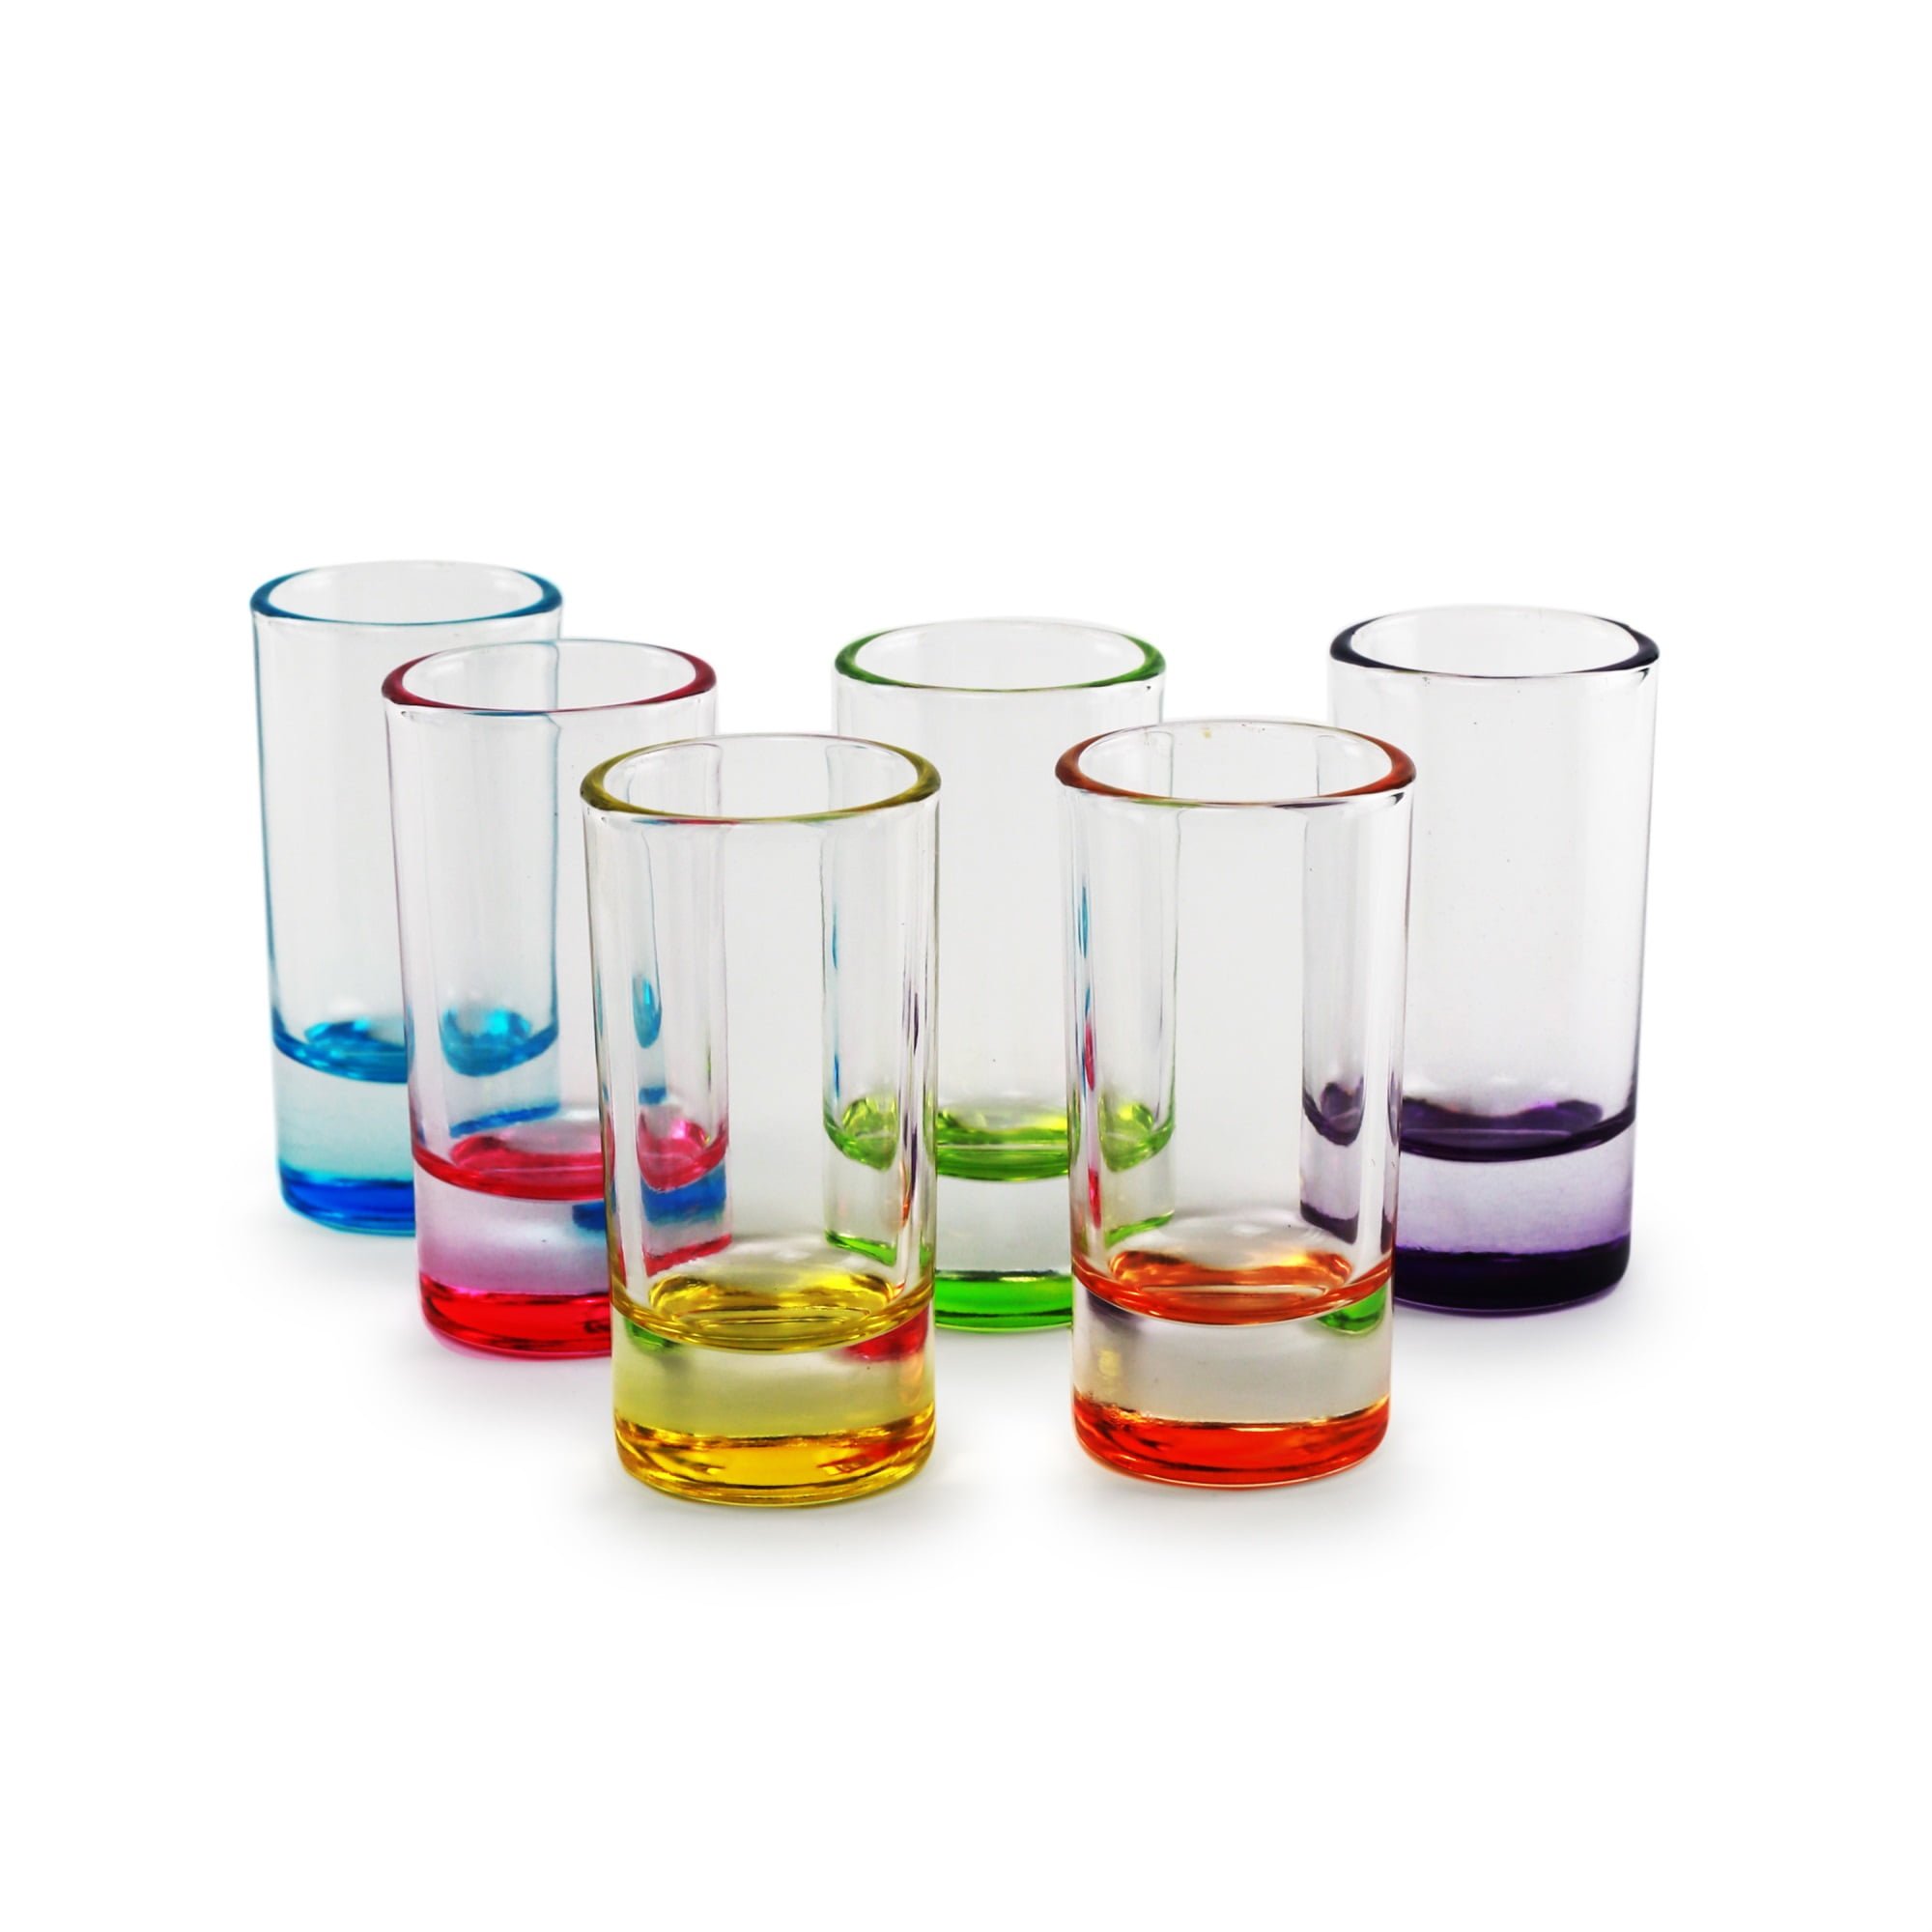 Picture of Circleware 42797/AM Circleware Paradise w/Style set of 6 - 1.2oz asst color shot glass